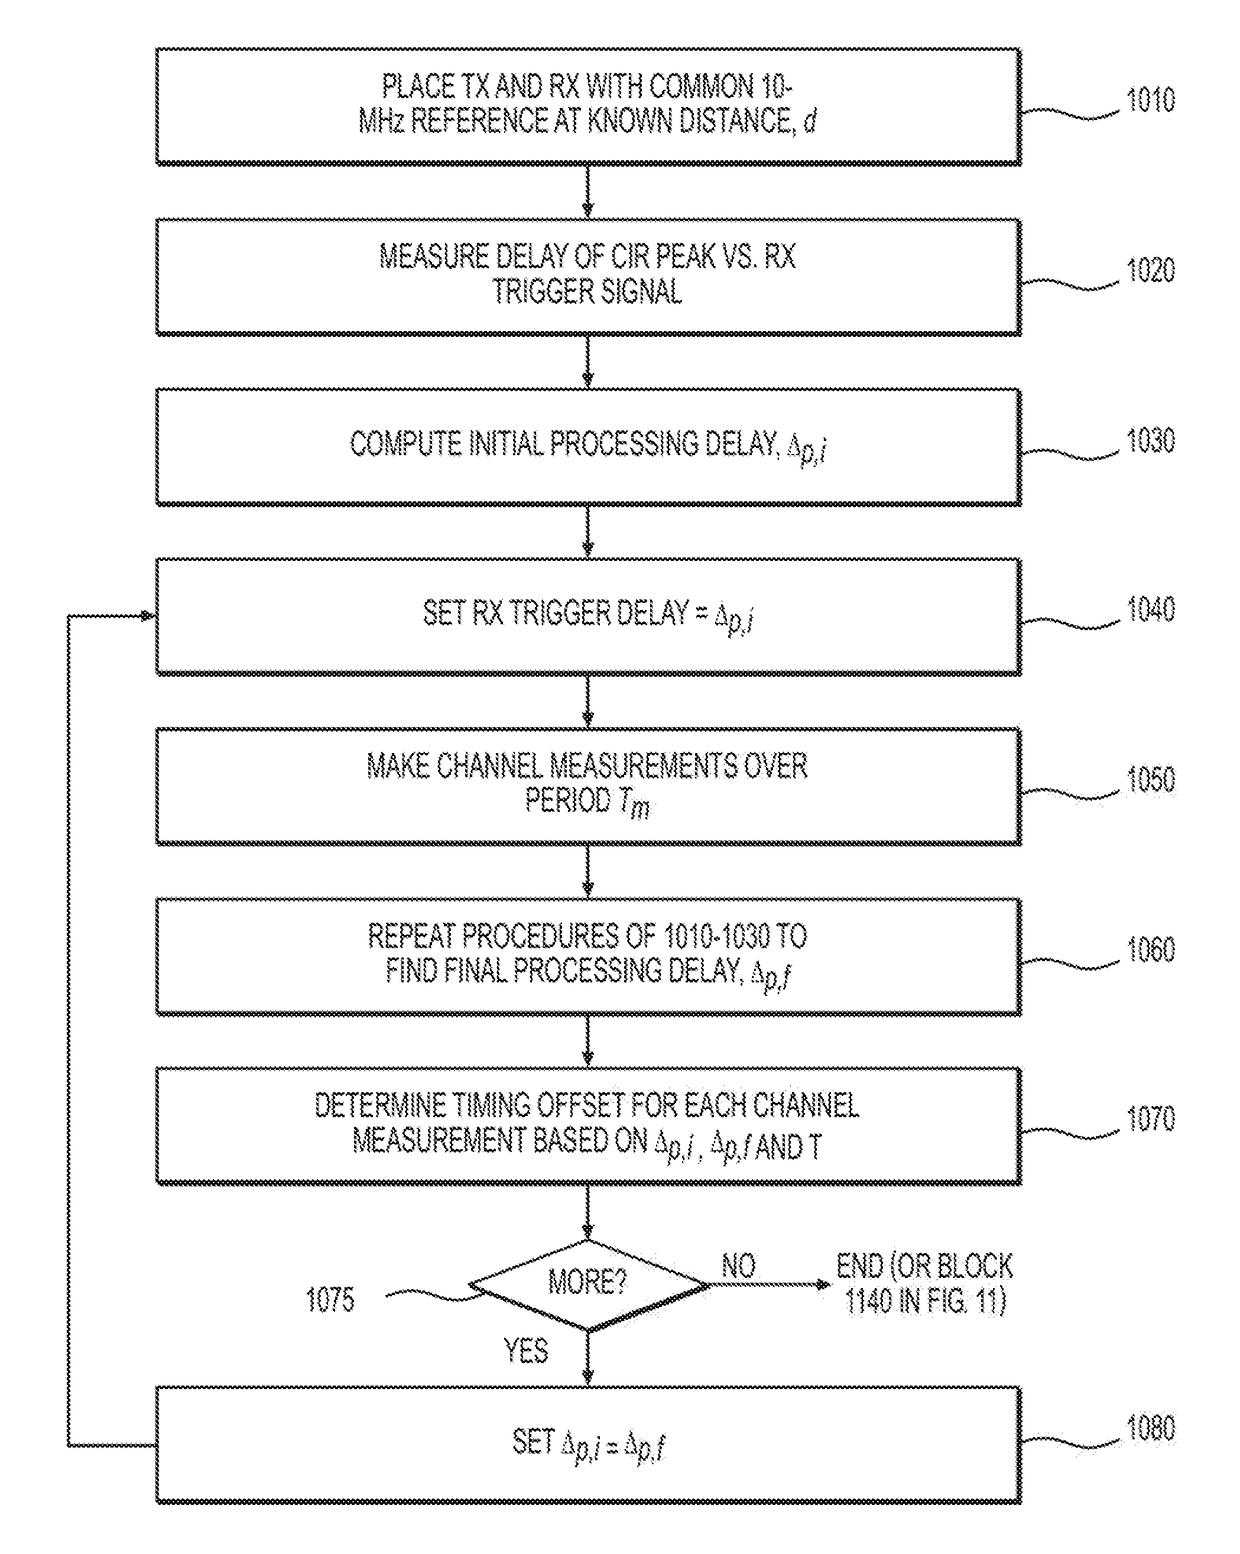 Systems, methods, and computer-accessible media for measuring or modeling a wideband, millimeter-wave channel and methods and systems for calibrating same